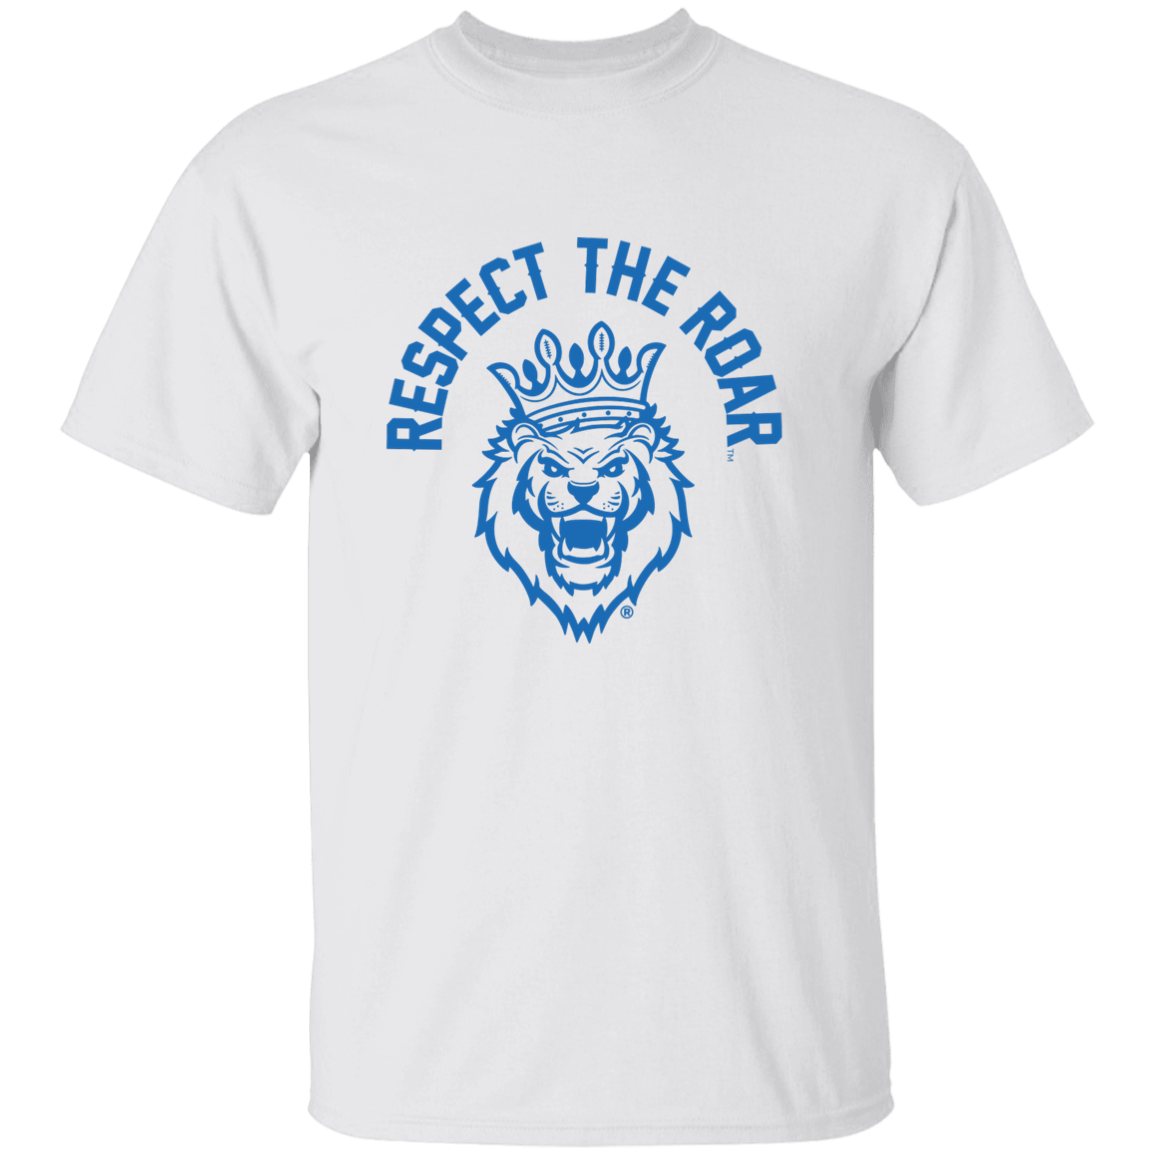 Respect The Roar® Youth T-Shirt